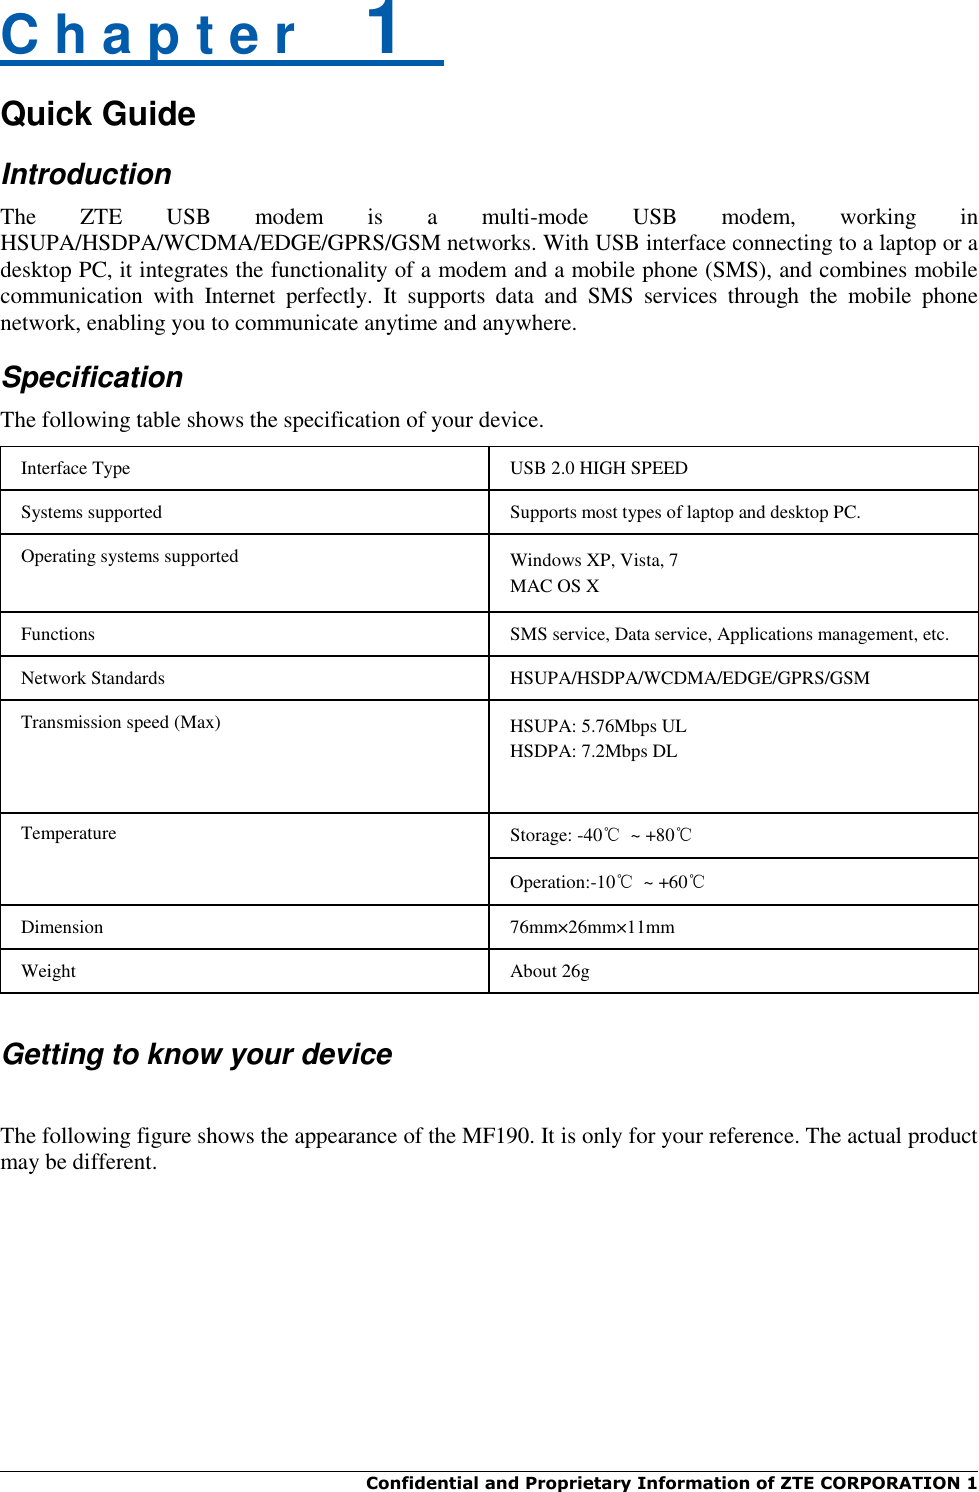  Confidential and Proprietary Information of ZTE CORPORATION 1    C h a p t e r    1   Quick Guide Introduction The  ZTE  USB  modem  is  a  multi-mode  USB  modem,  working  in HSUPA/HSDPA/WCDMA/EDGE/GPRS/GSM networks. With USB interface connecting to a laptop or a desktop PC, it integrates the functionality of a modem and a mobile phone (SMS), and combines mobile communication  with  Internet  perfectly.  It  supports  data  and  SMS  services  through  the  mobile  phone network, enabling you to communicate anytime and anywhere. Specification The following table shows the specification of your device. Interface Type USB 2.0 HIGH SPEED Systems supported Supports most types of laptop and desktop PC. Operating systems supported Windows XP, Vista, 7 MAC OS X Functions SMS service, Data service, Applications management, etc. Network Standards HSUPA/HSDPA/WCDMA/EDGE/GPRS/GSM Transmission speed (Max) HSUPA: 5.76Mbps UL HSDPA: 7.2Mbps DL Temperature Storage: -40℃  ~ +80℃ Operation:-10℃  ~ +60℃ Dimension 76mm×26mm×11mm Weight About 26g   Getting to know your device  The following figure shows the appearance of the MF190. It is only for your reference. The actual product may be different. 